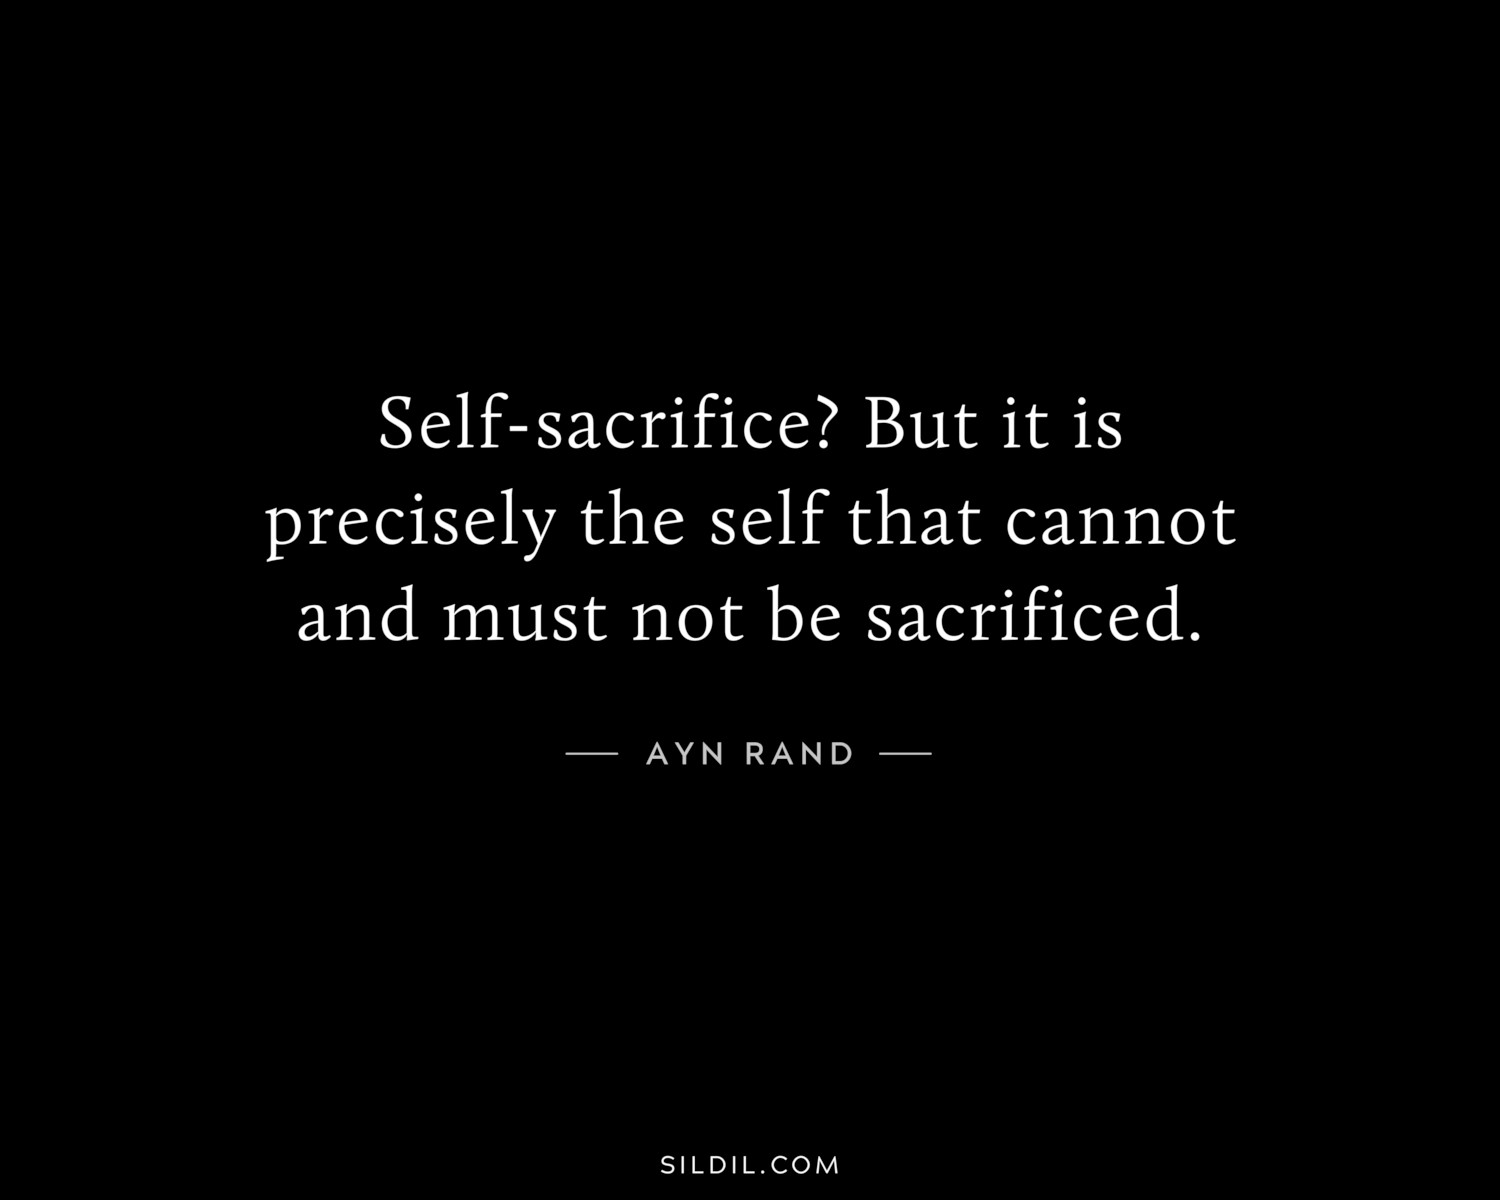 Self-sacrifice? But it is precisely the self that cannot and must not be sacrificed.